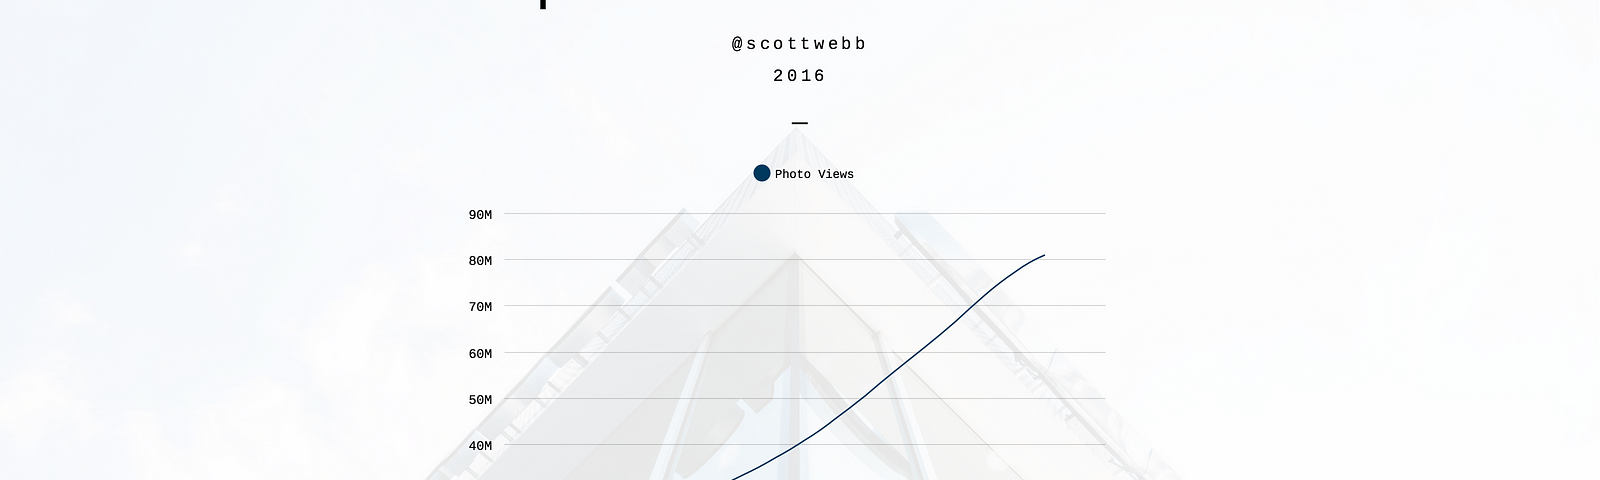 Unsplash Photo View Stats for 2016 on my @scottwebb account